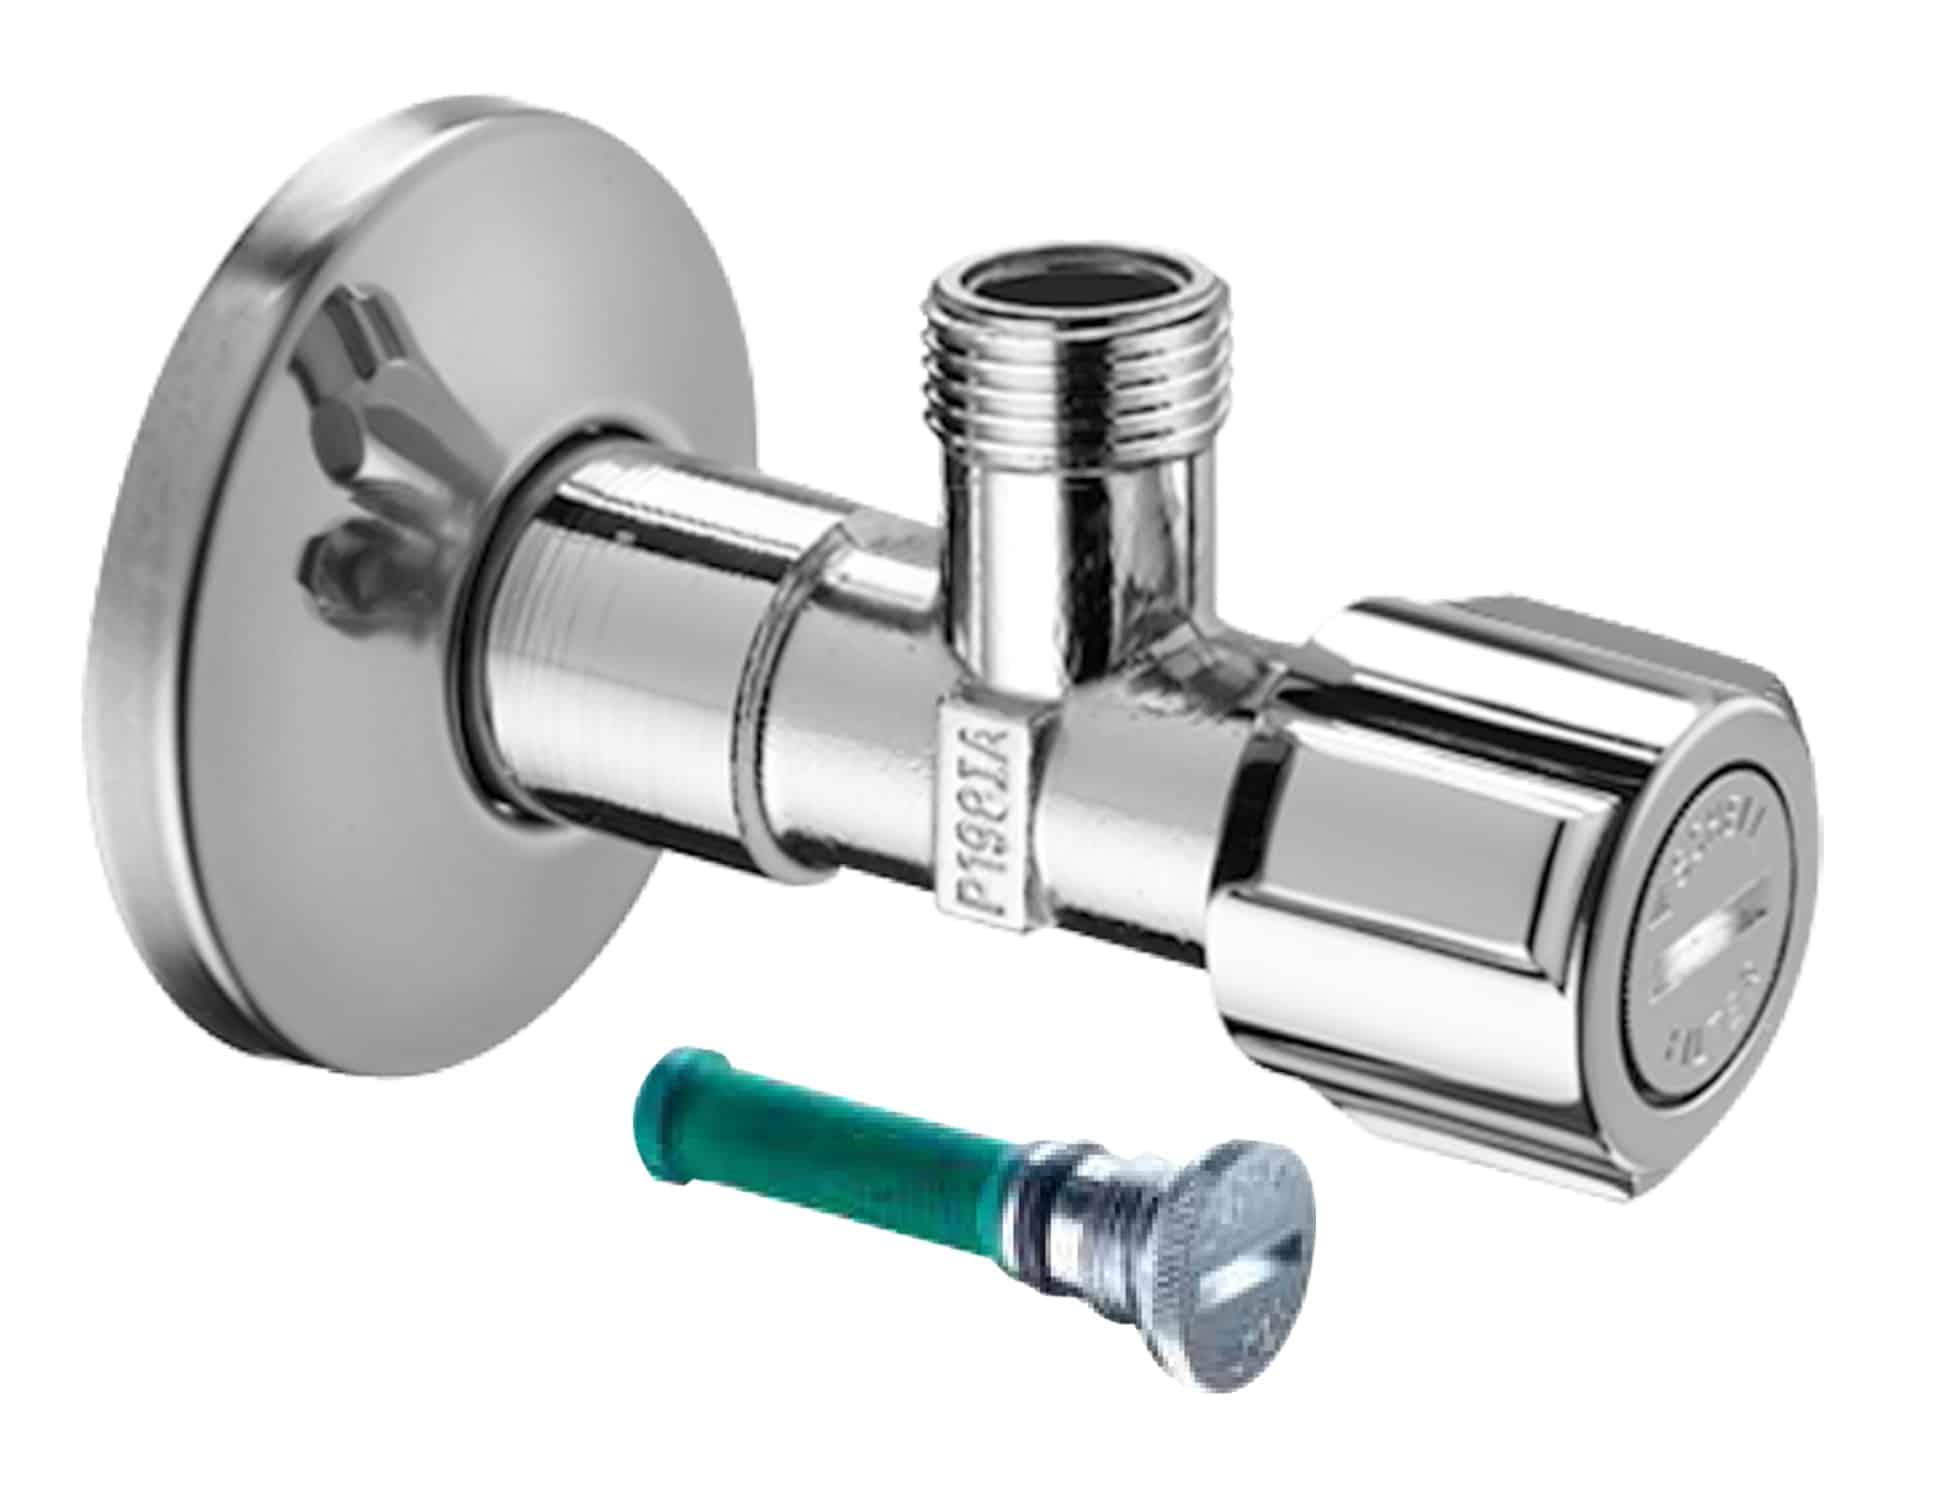 SCHELL brass filter angle valve in silver colour chrome finish